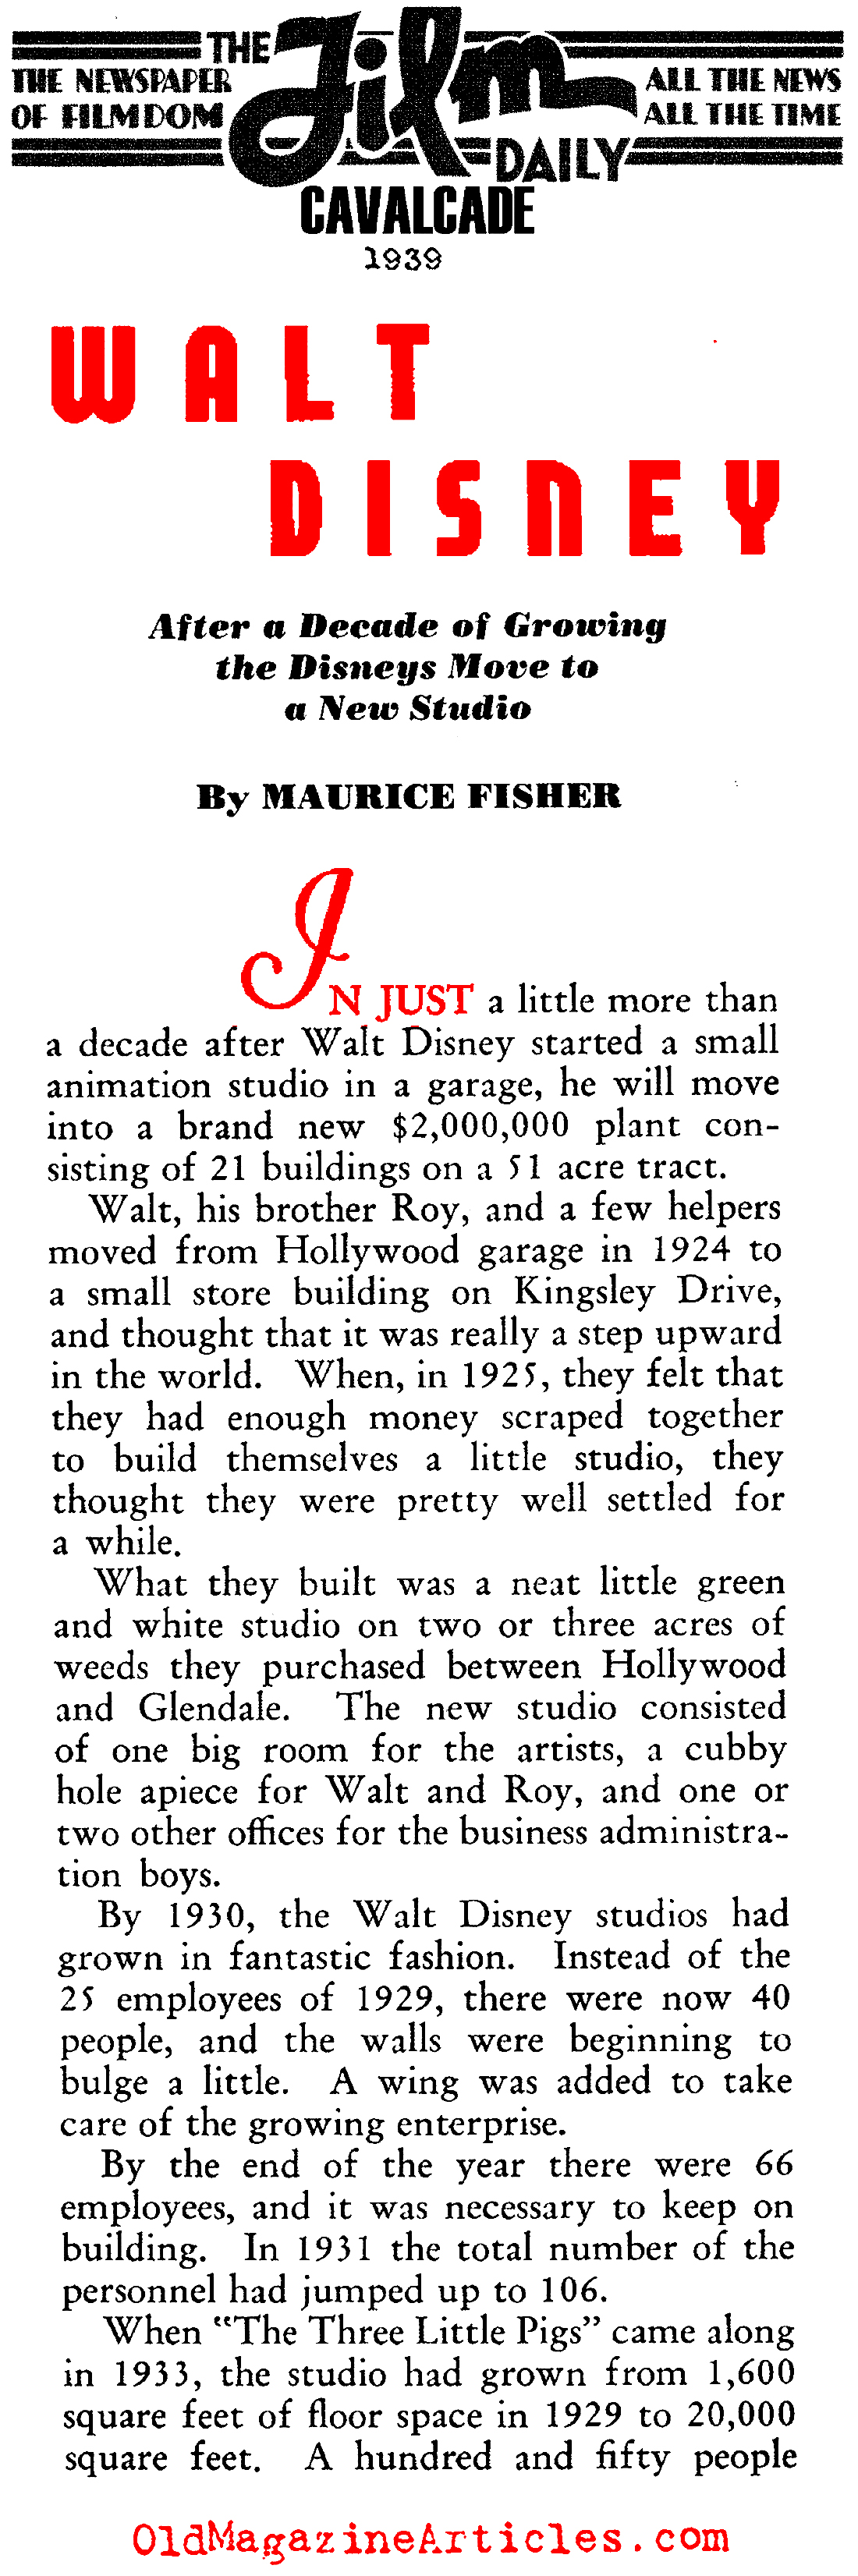 Growth and Expansion at the Walt Disney Company (Film Daily, 1939)